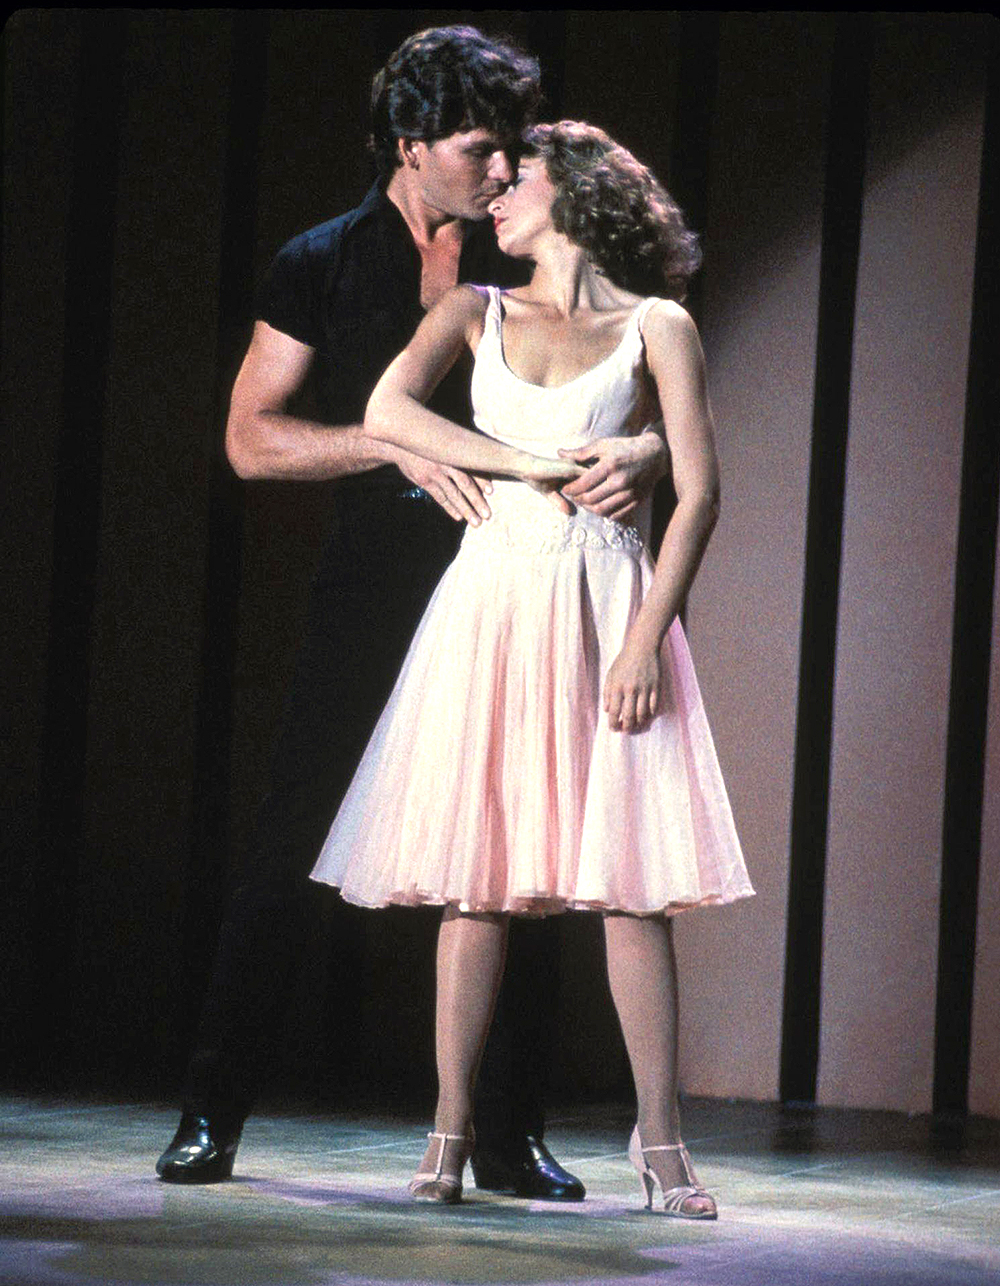 Dirty Dancing Photos Of The 1987 Movie image